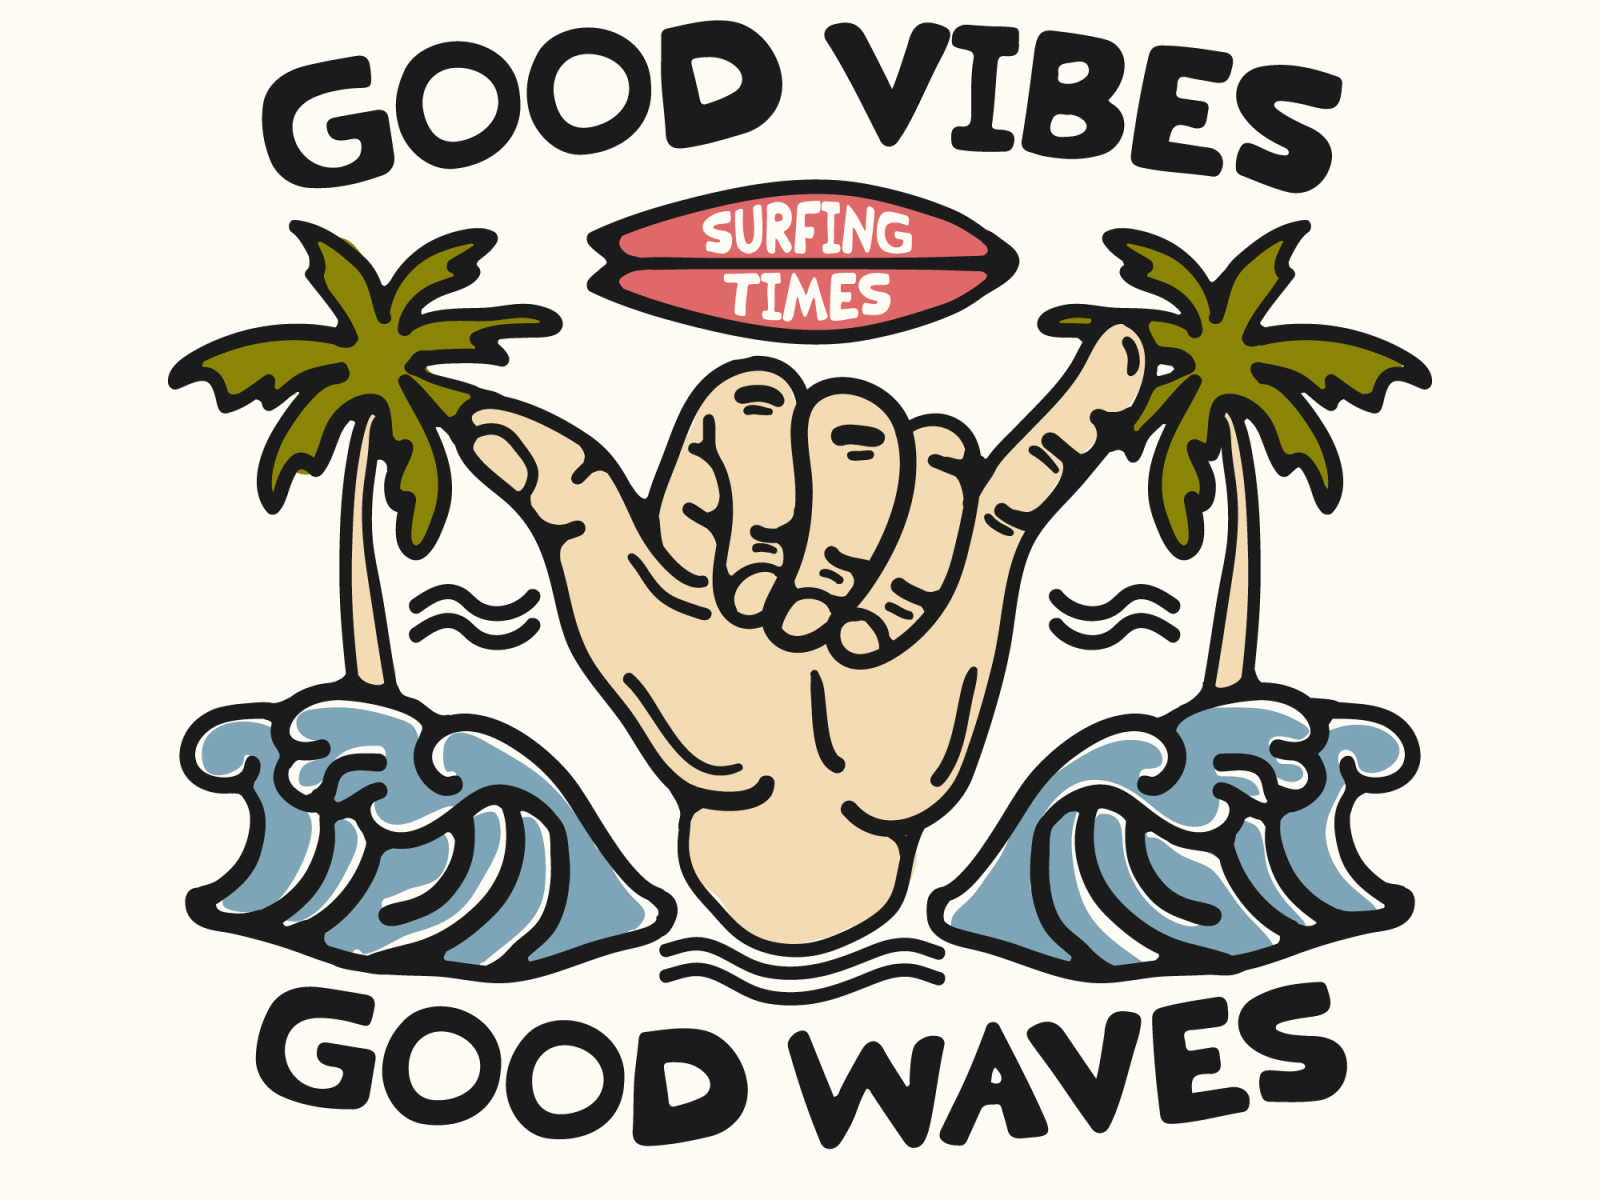 Good vibes by Otto.std on Dribbble